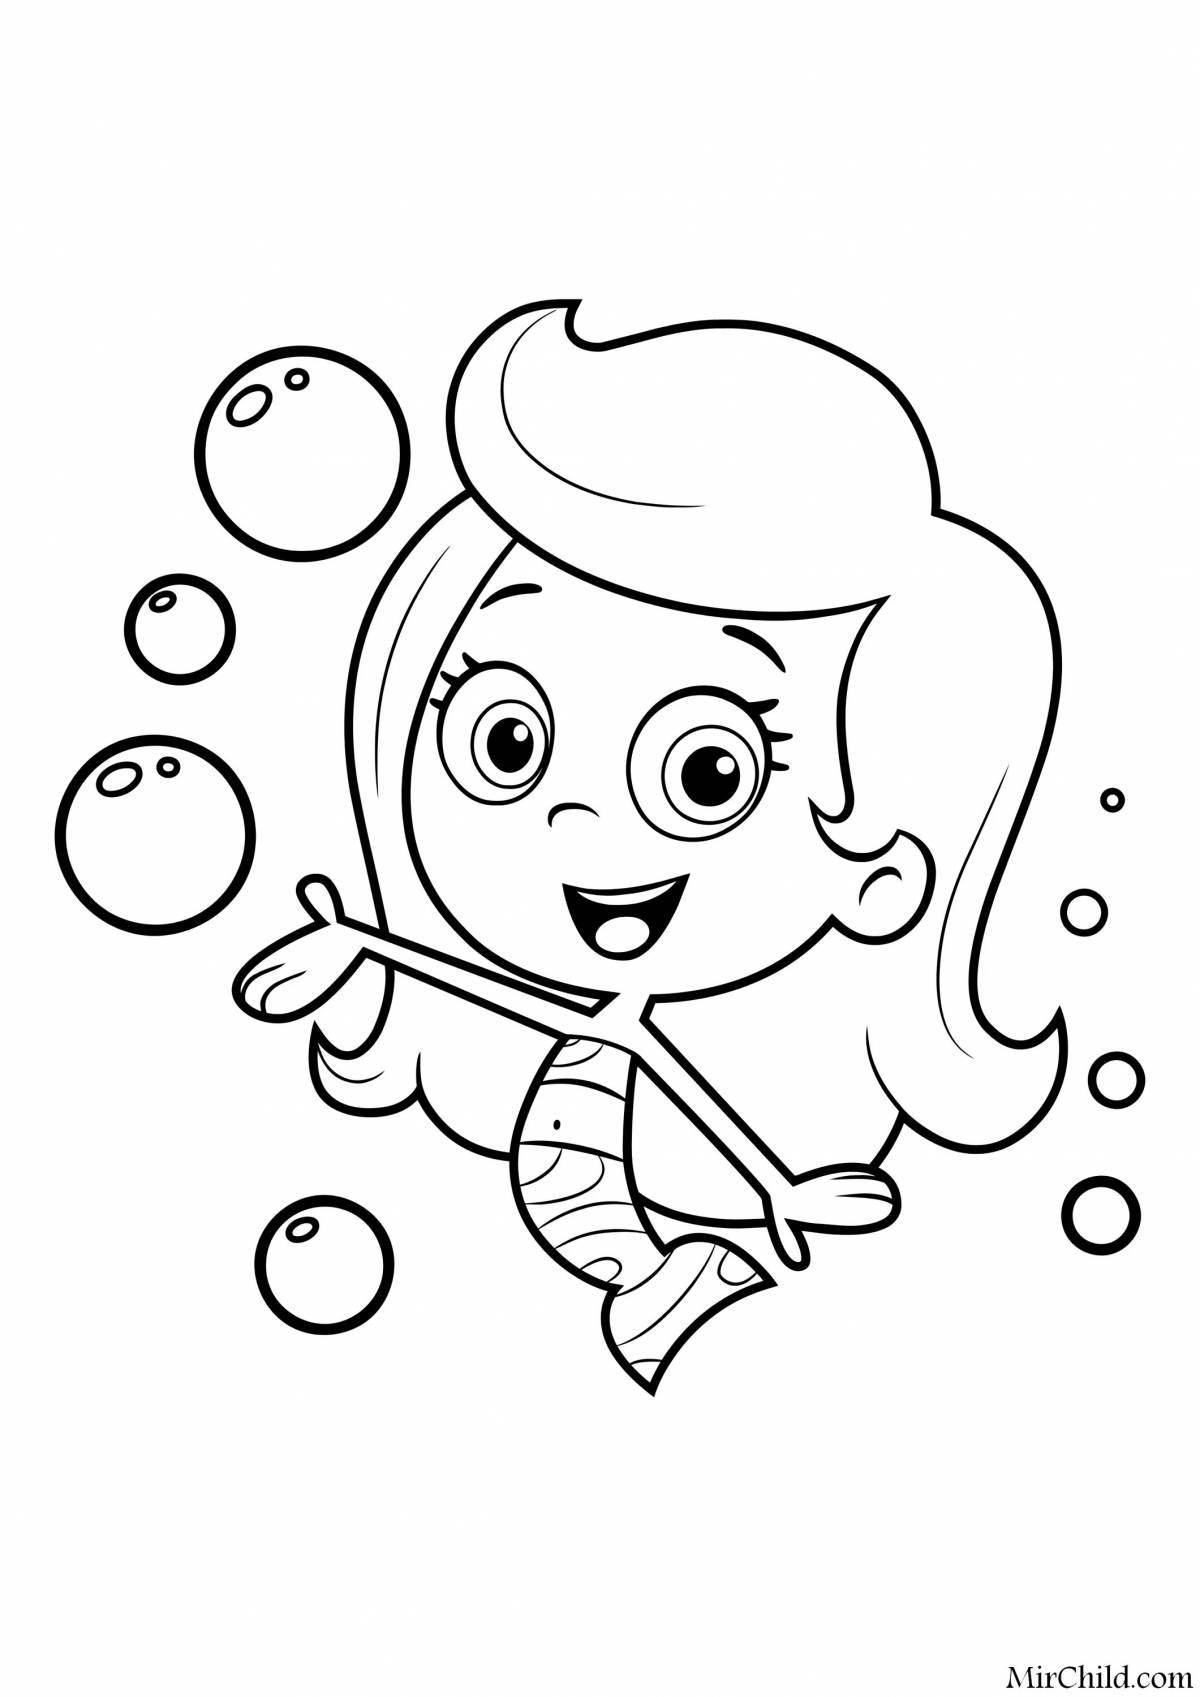 Coloring page of shining bubbles